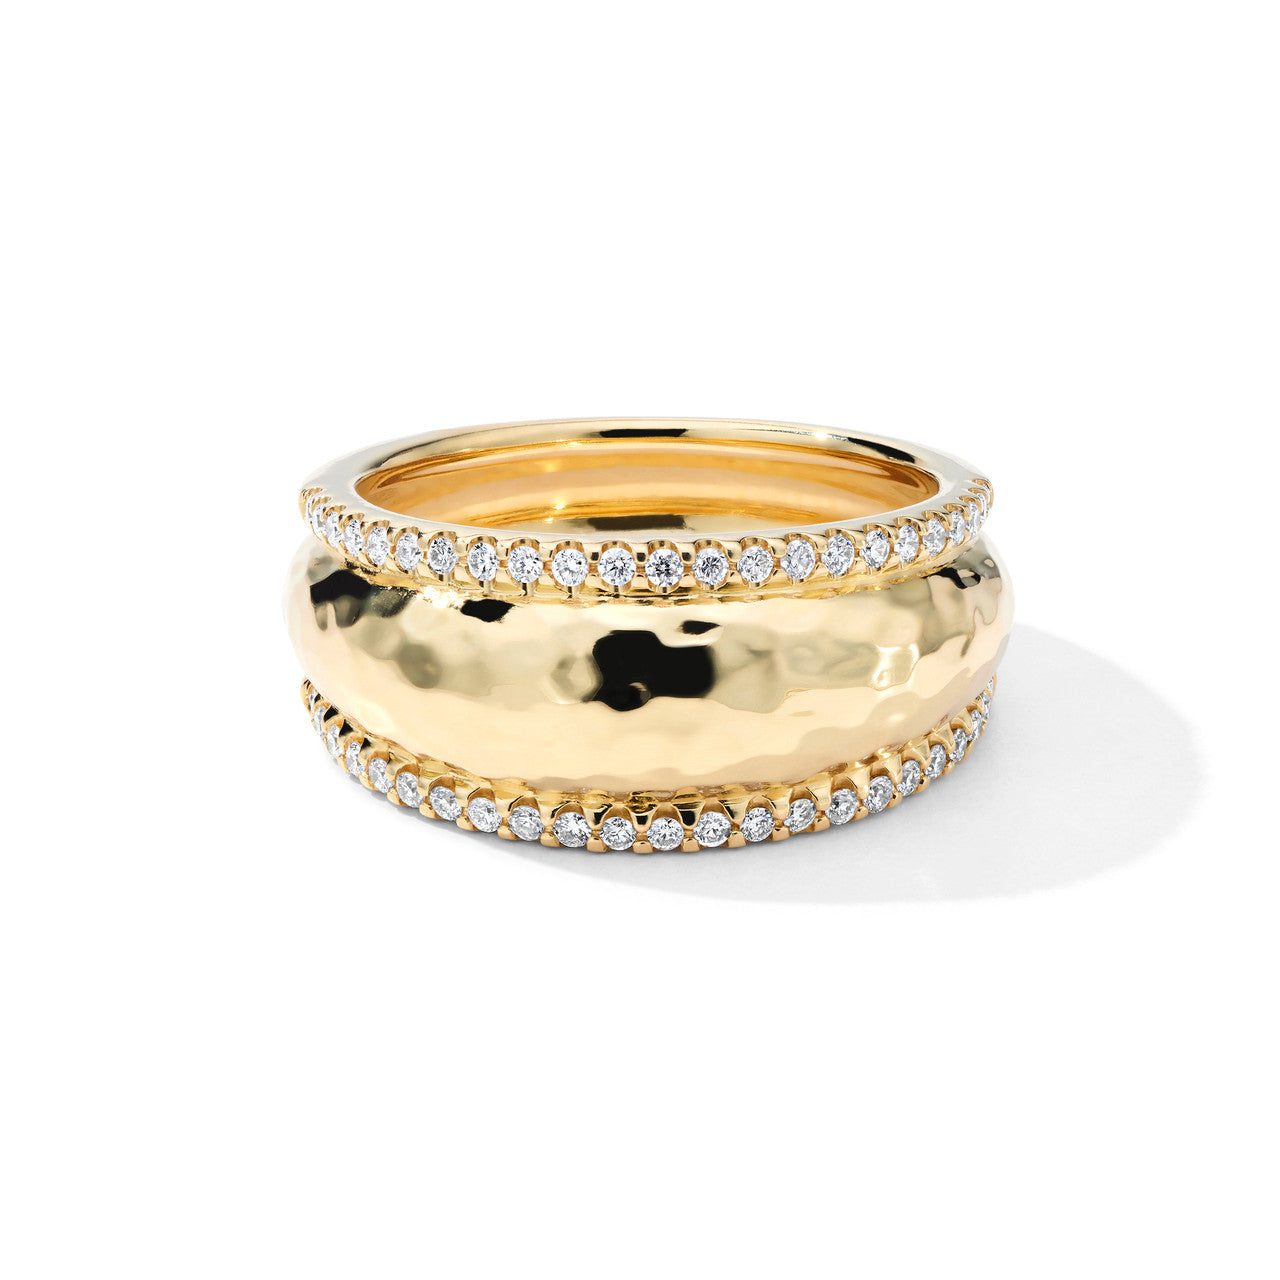 Stardust Goddess Hammered Dome Ring with Diamonds